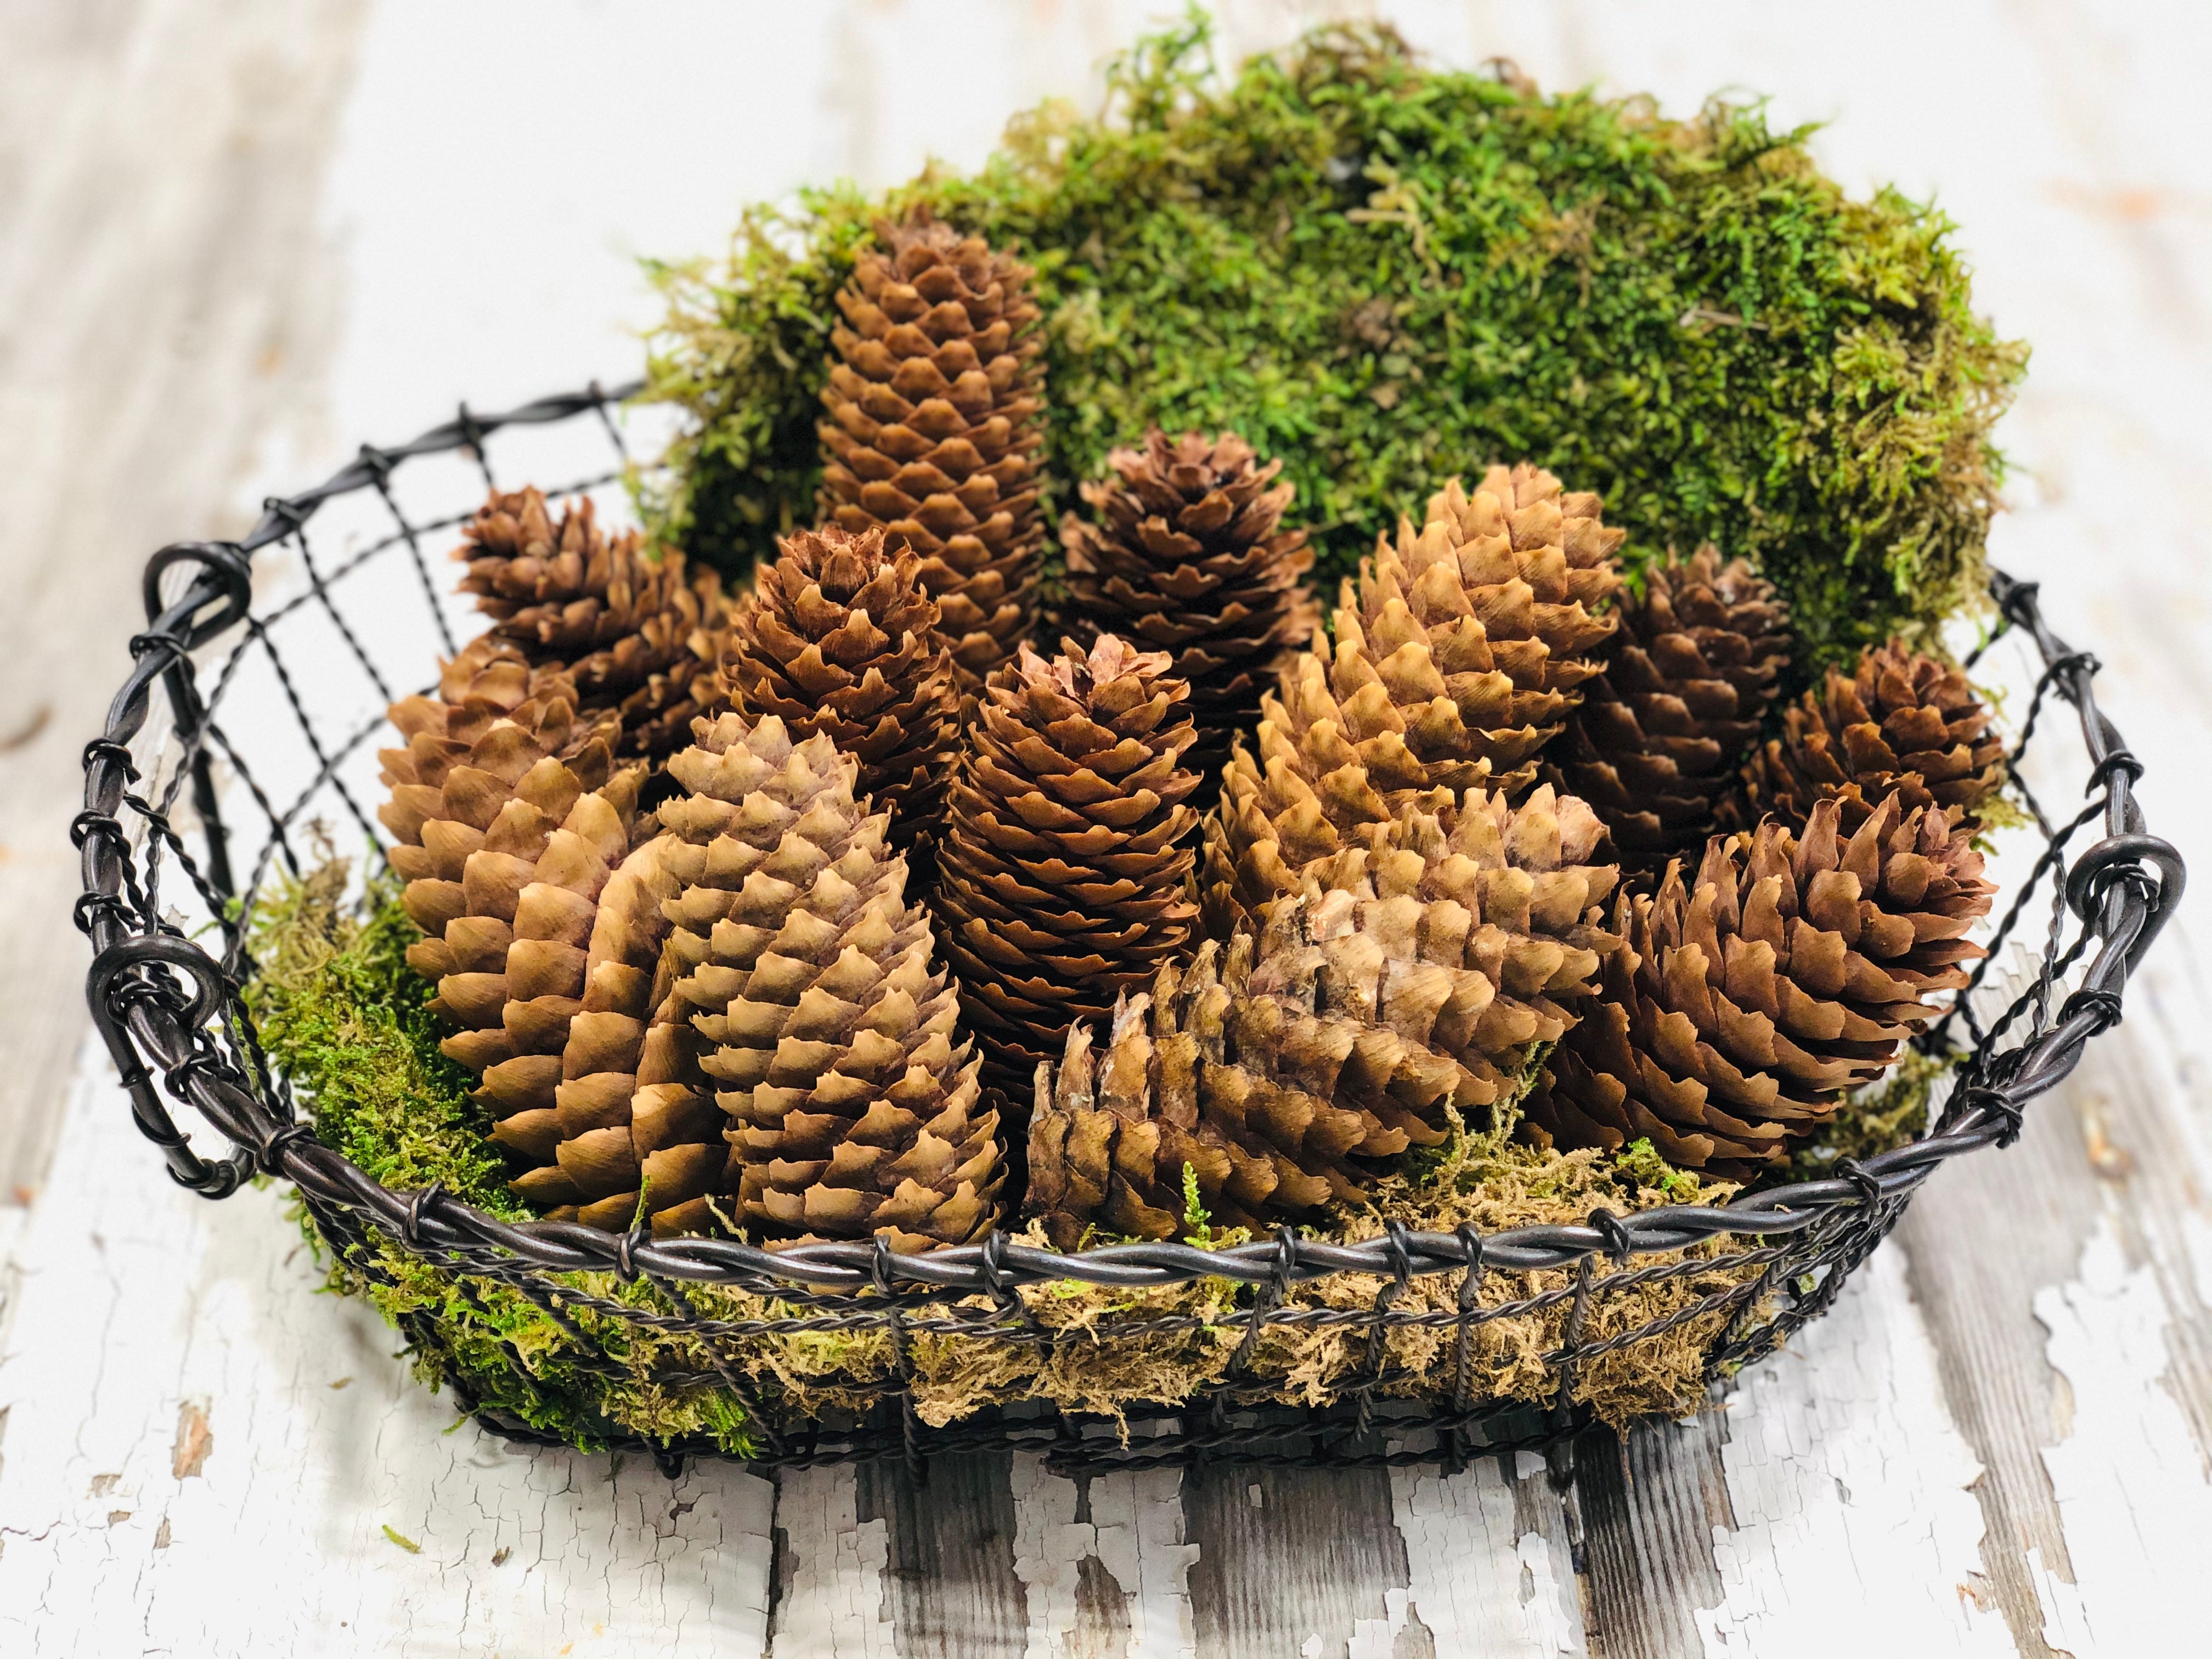 2.5 Pine Cone on Pick: Natural Finish (Bag of 50)